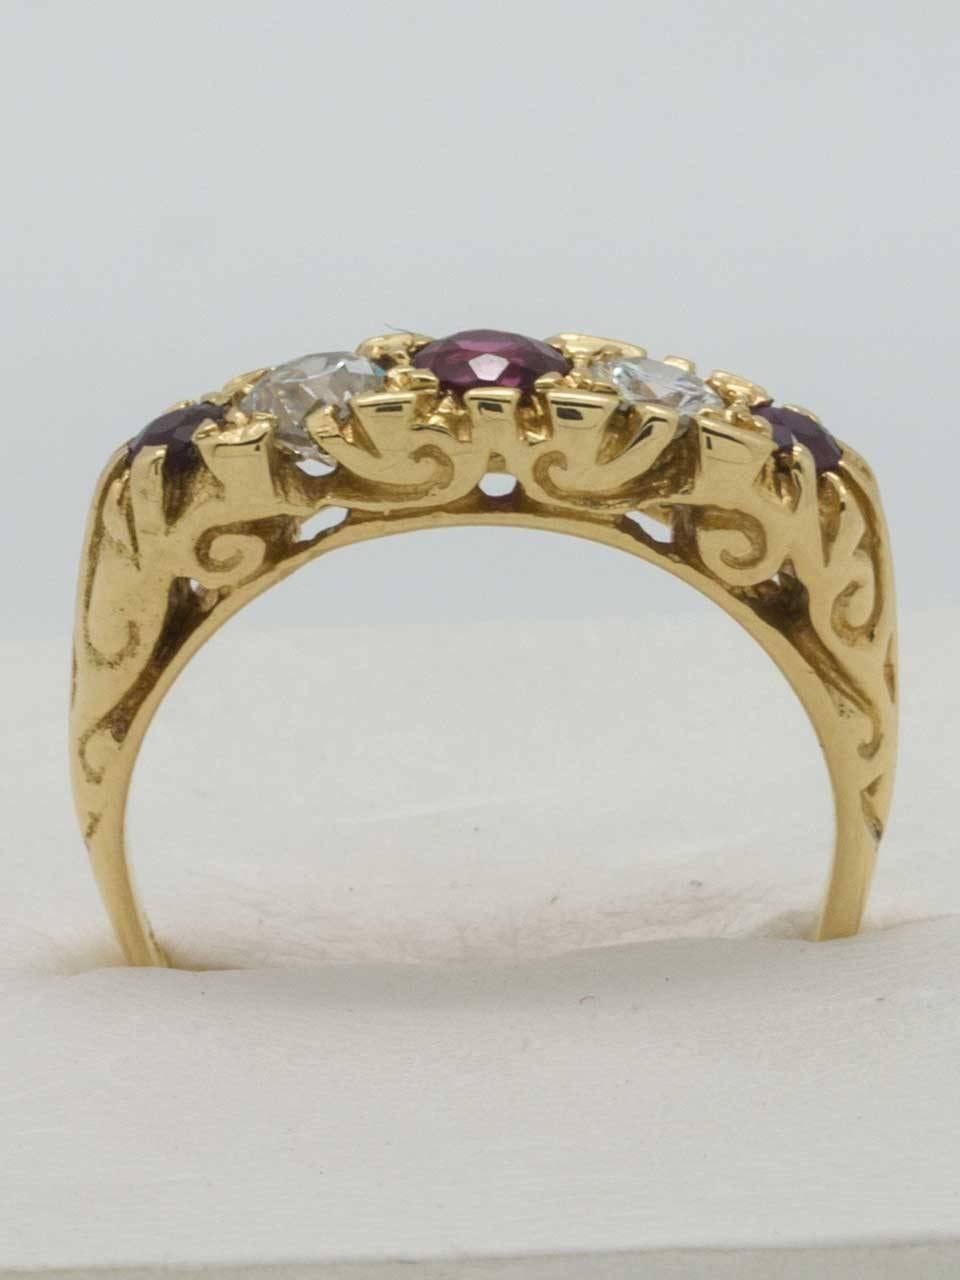 Victorian Era 18K YG ruby and diamond band circa 1900. Very pretty design, classic 5 stone ring with 3 untested old cut rubies alternating with 2 old european cut diamonds. Center ruby is 0.25 approximate carat, 2 side rubies are 0.10 approximate